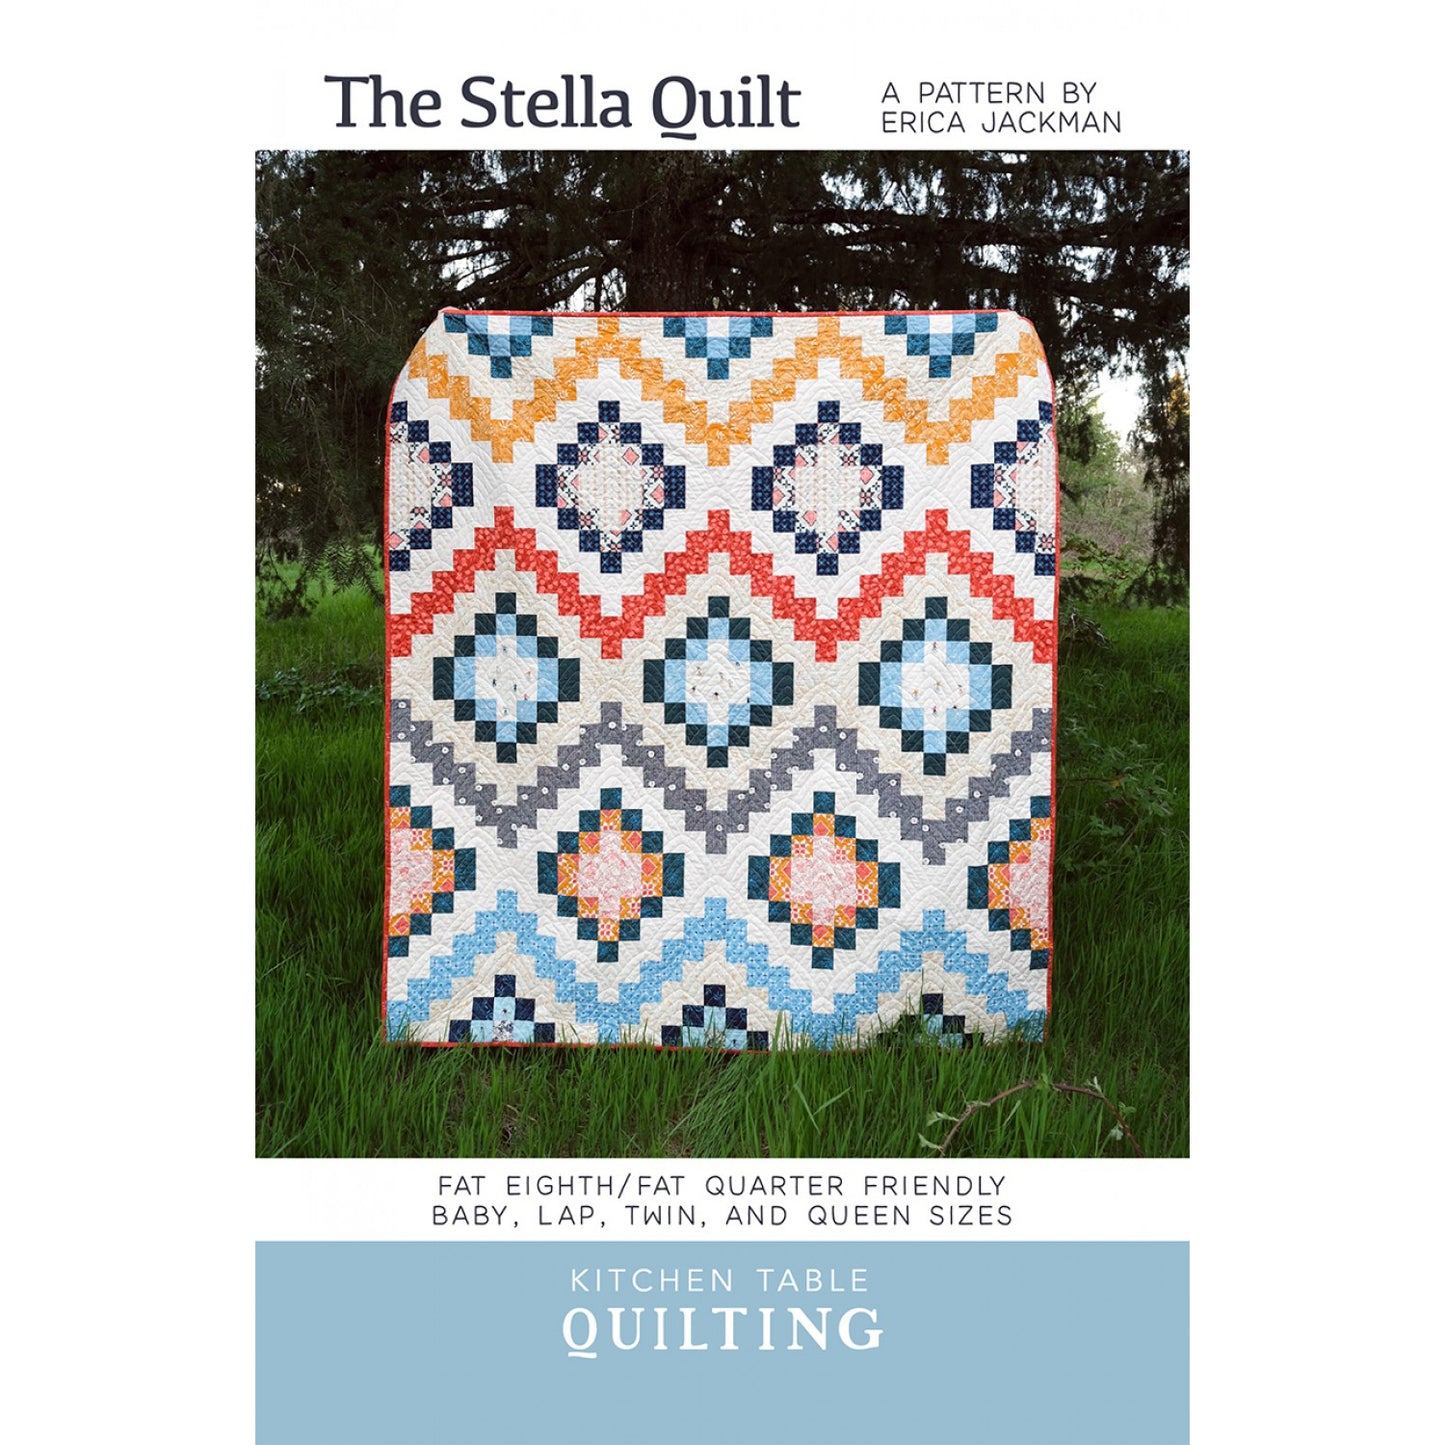 Kitchen Table Quilting - The Stella Quilt Pattern